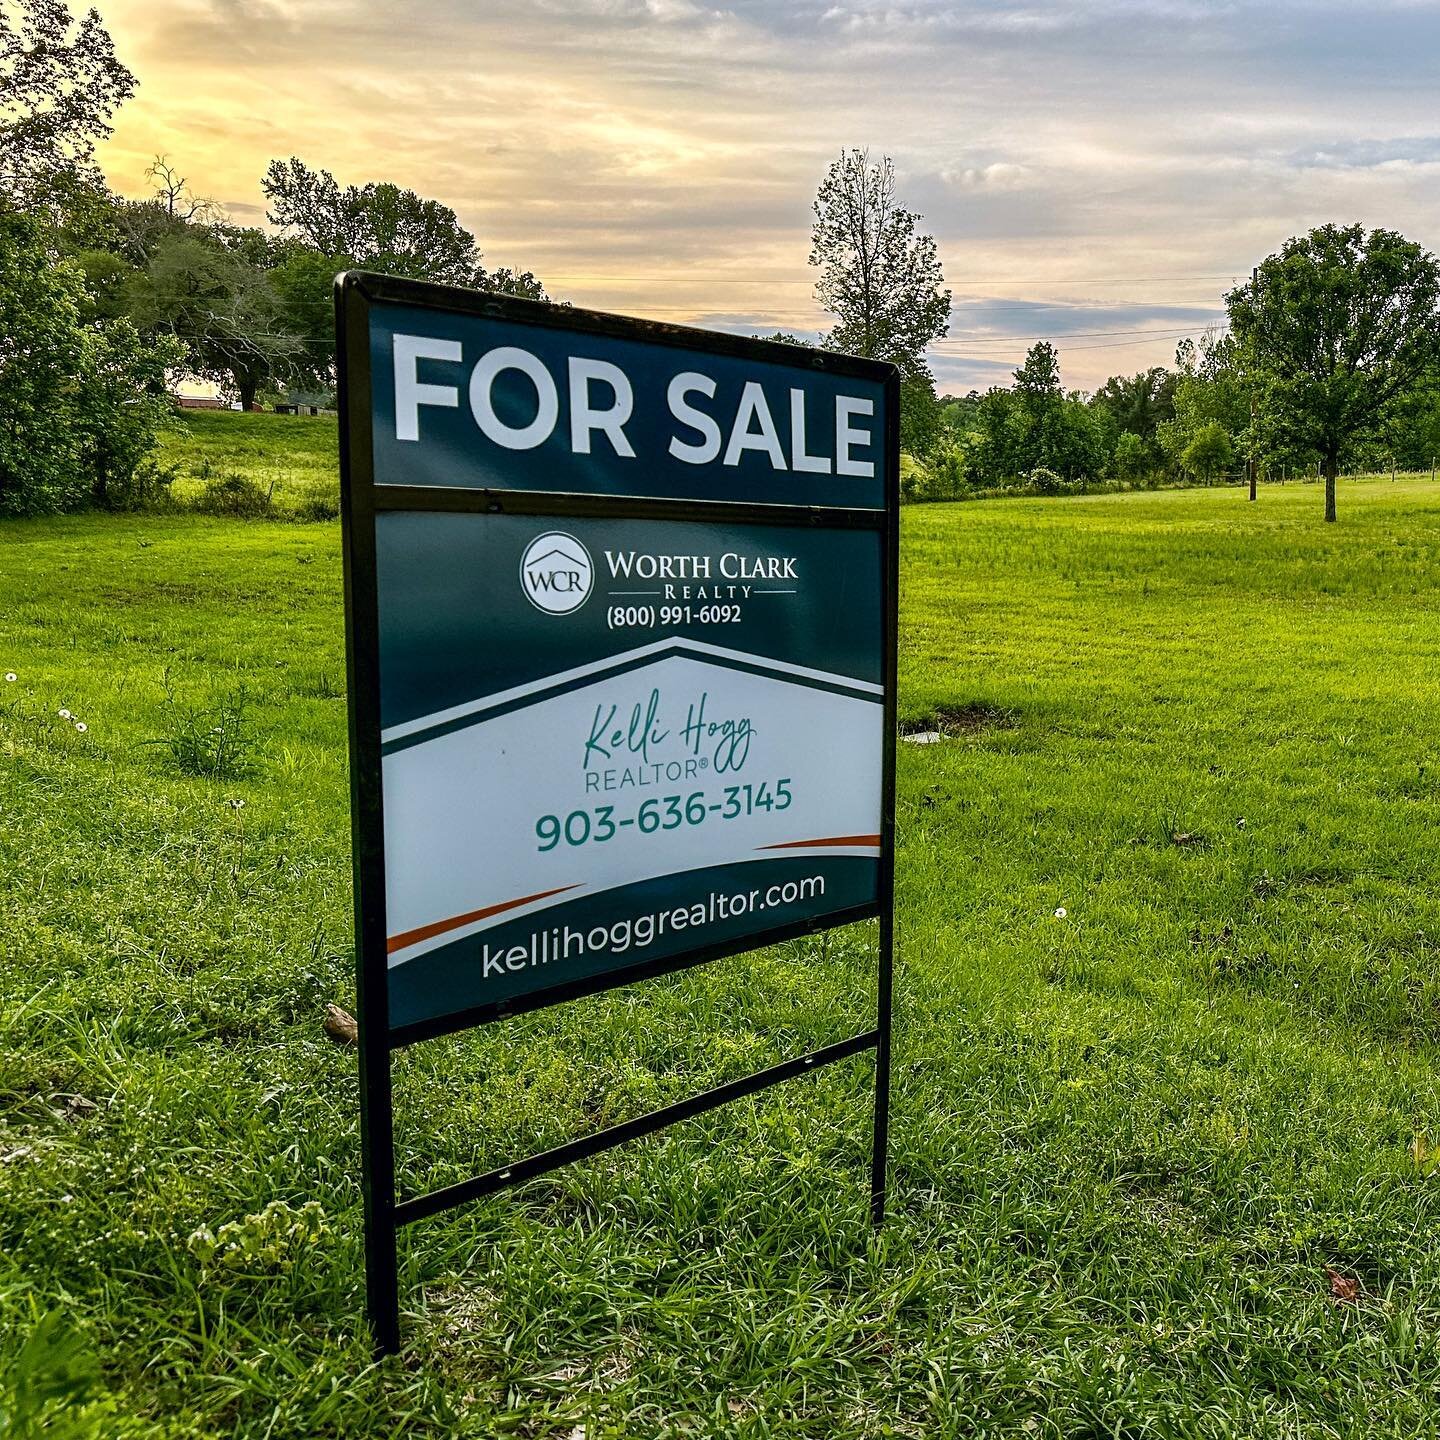 It&rsquo;s a pretty evening to put a sign up! 

#easttexasrealestate #easttexasrealtor #texassunset #buydirt